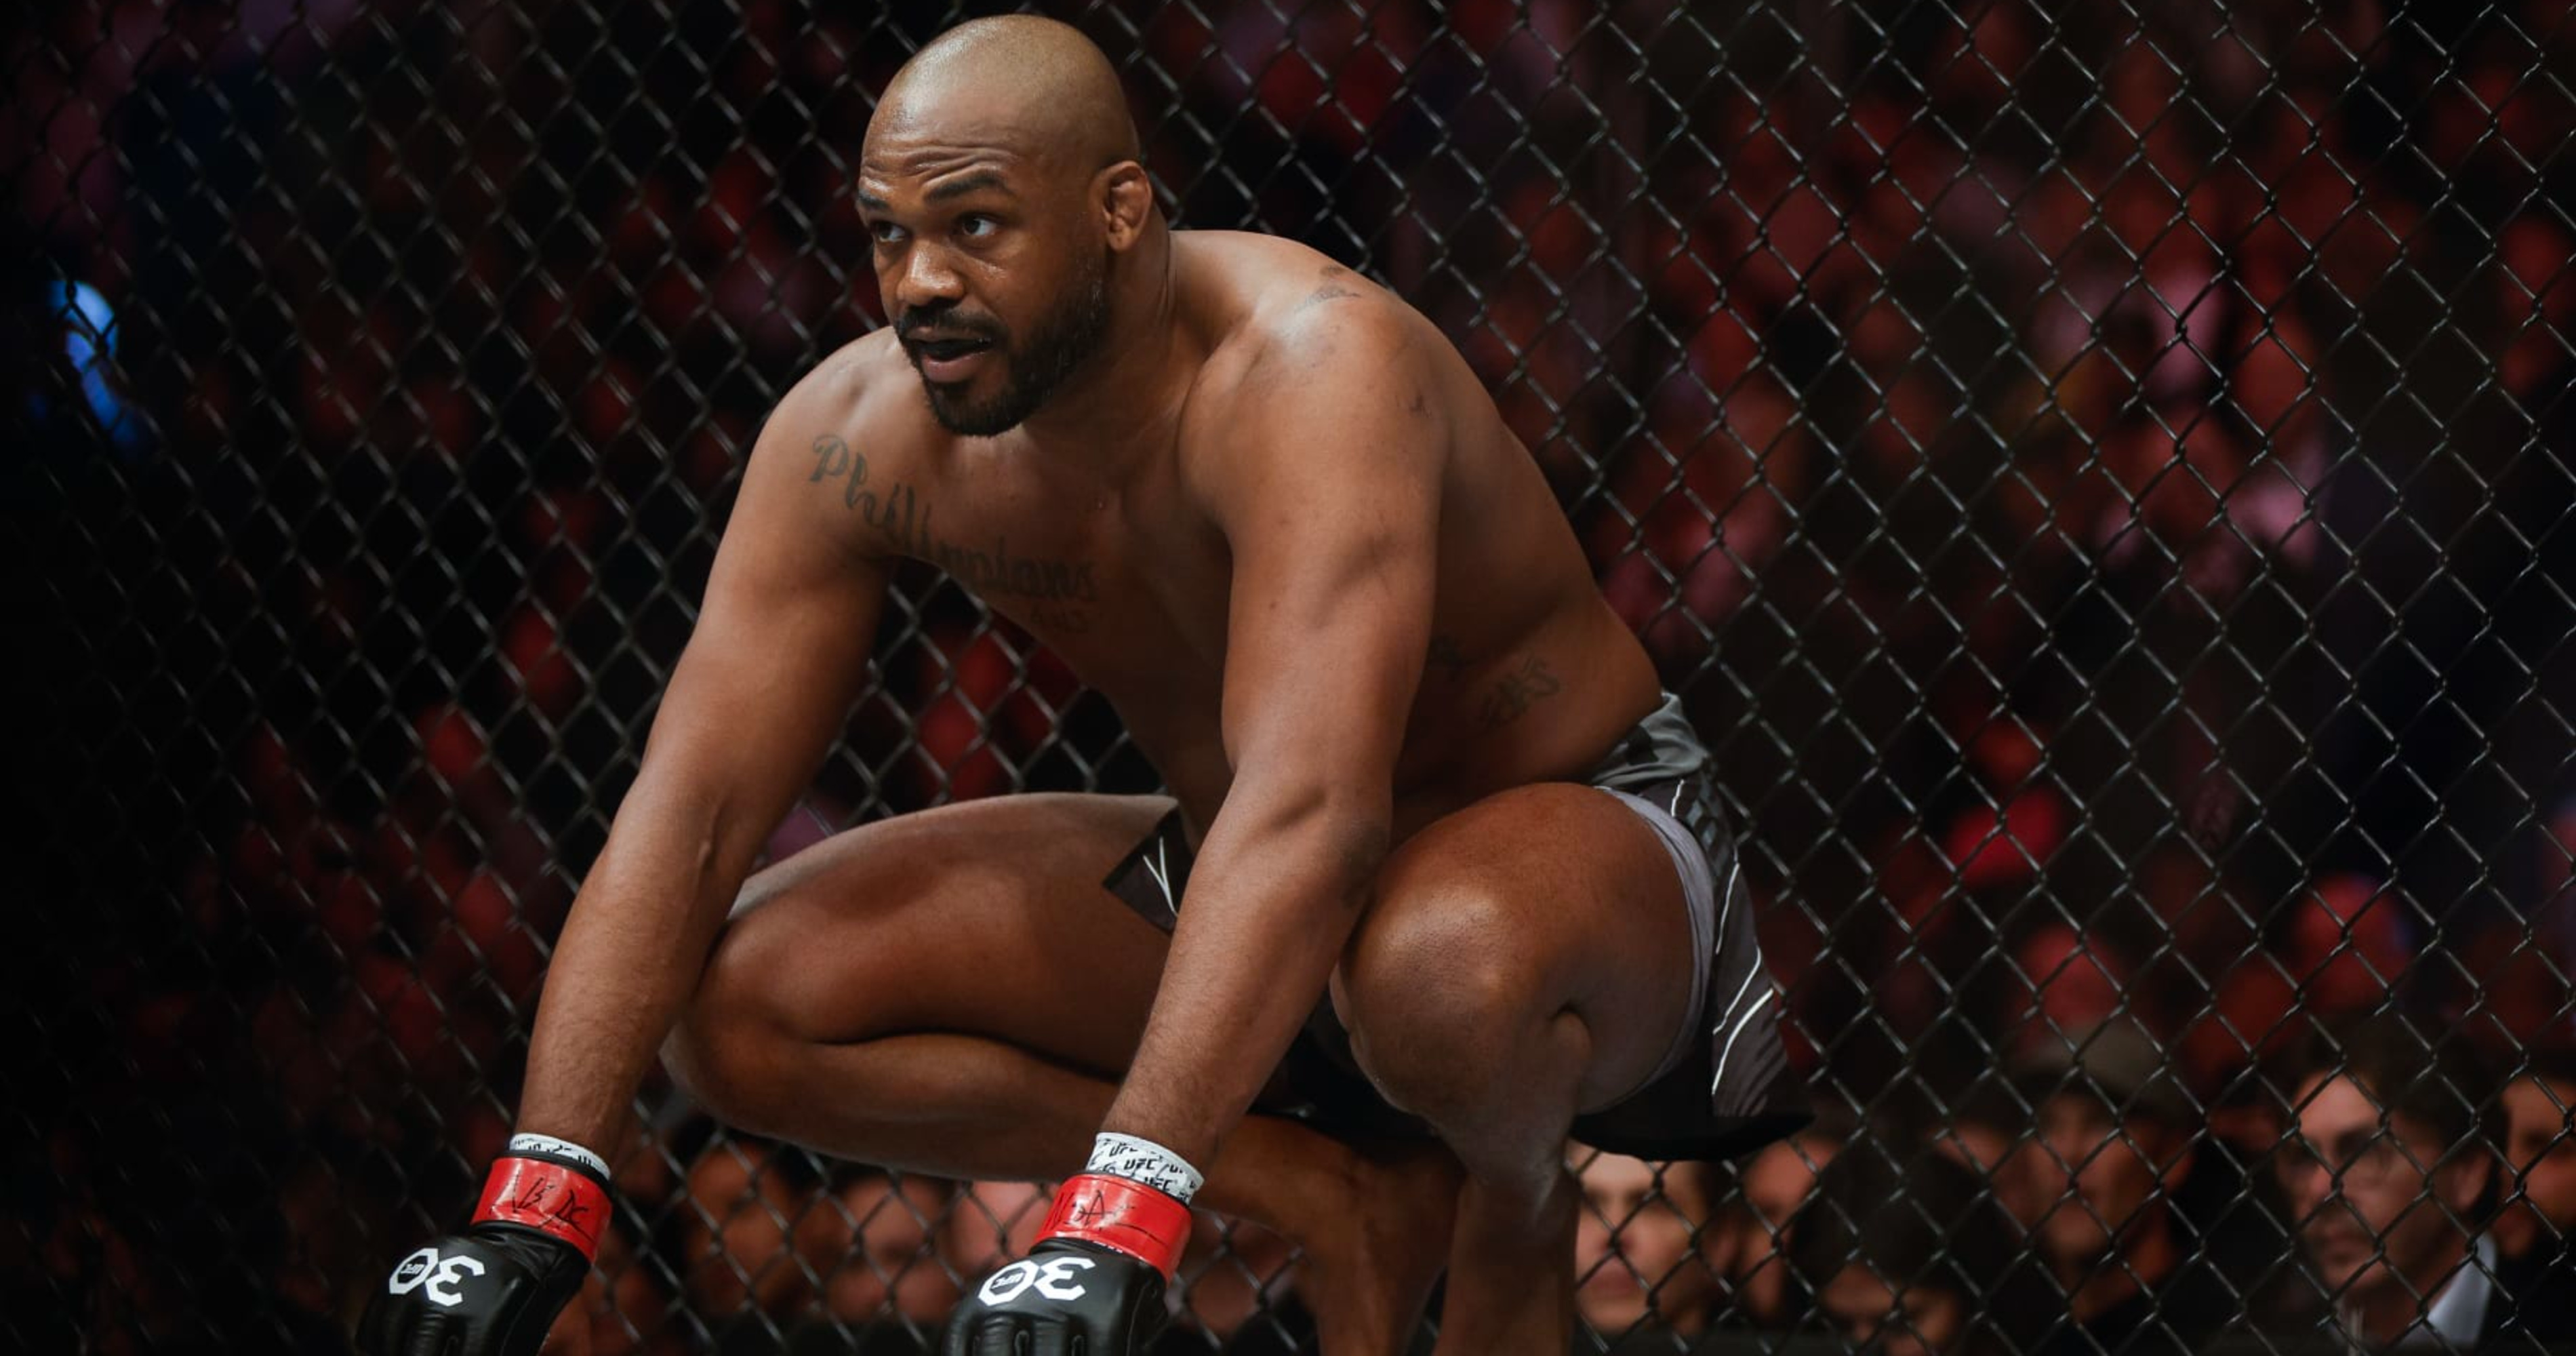 UFC Champion Jones Makes Statement After Fight With Miocic Canceled